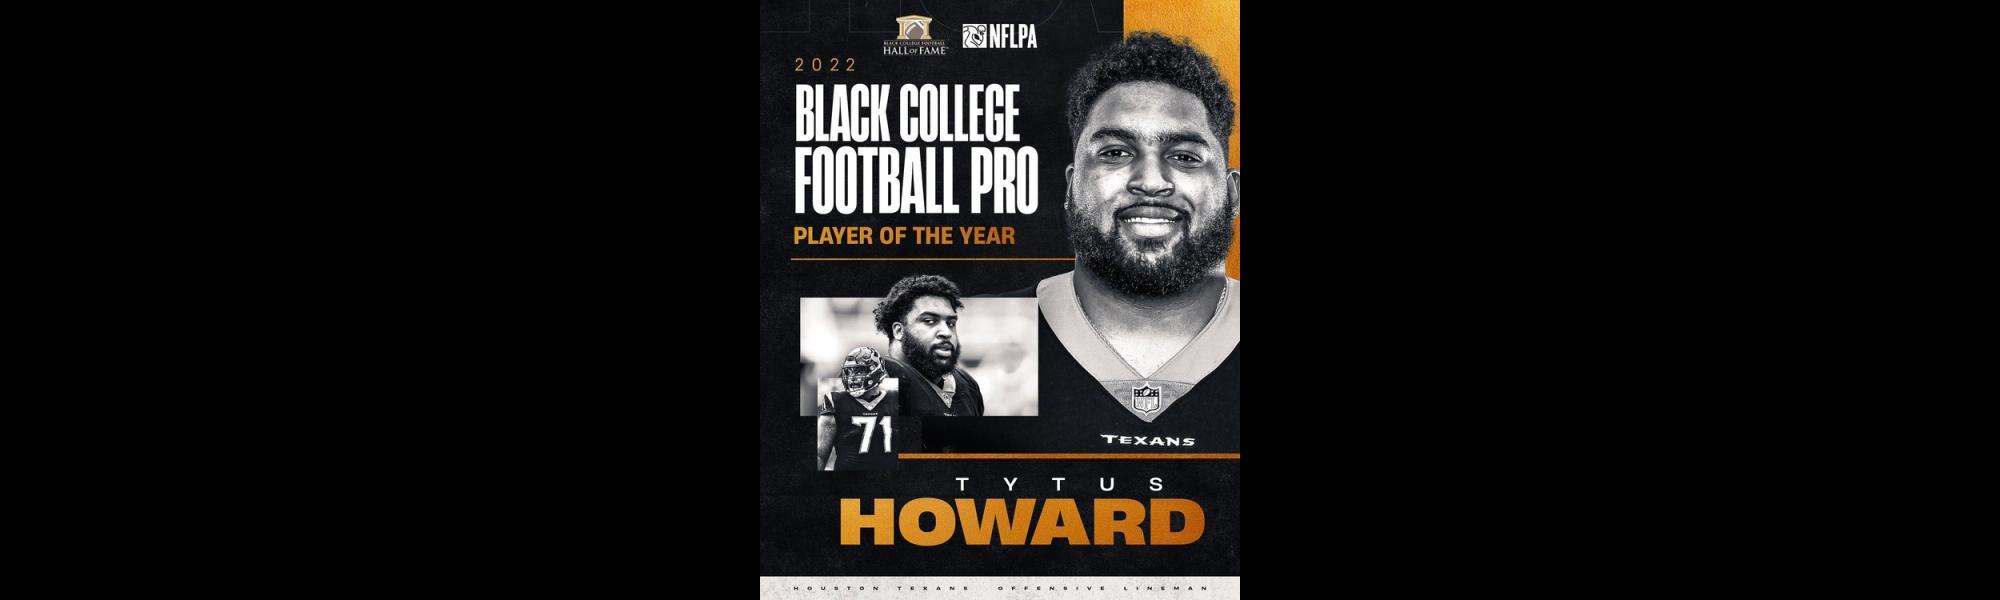 Houston's Tytus Howard Named NFLPA’S 2022 Black College Football Pro Player of the Year